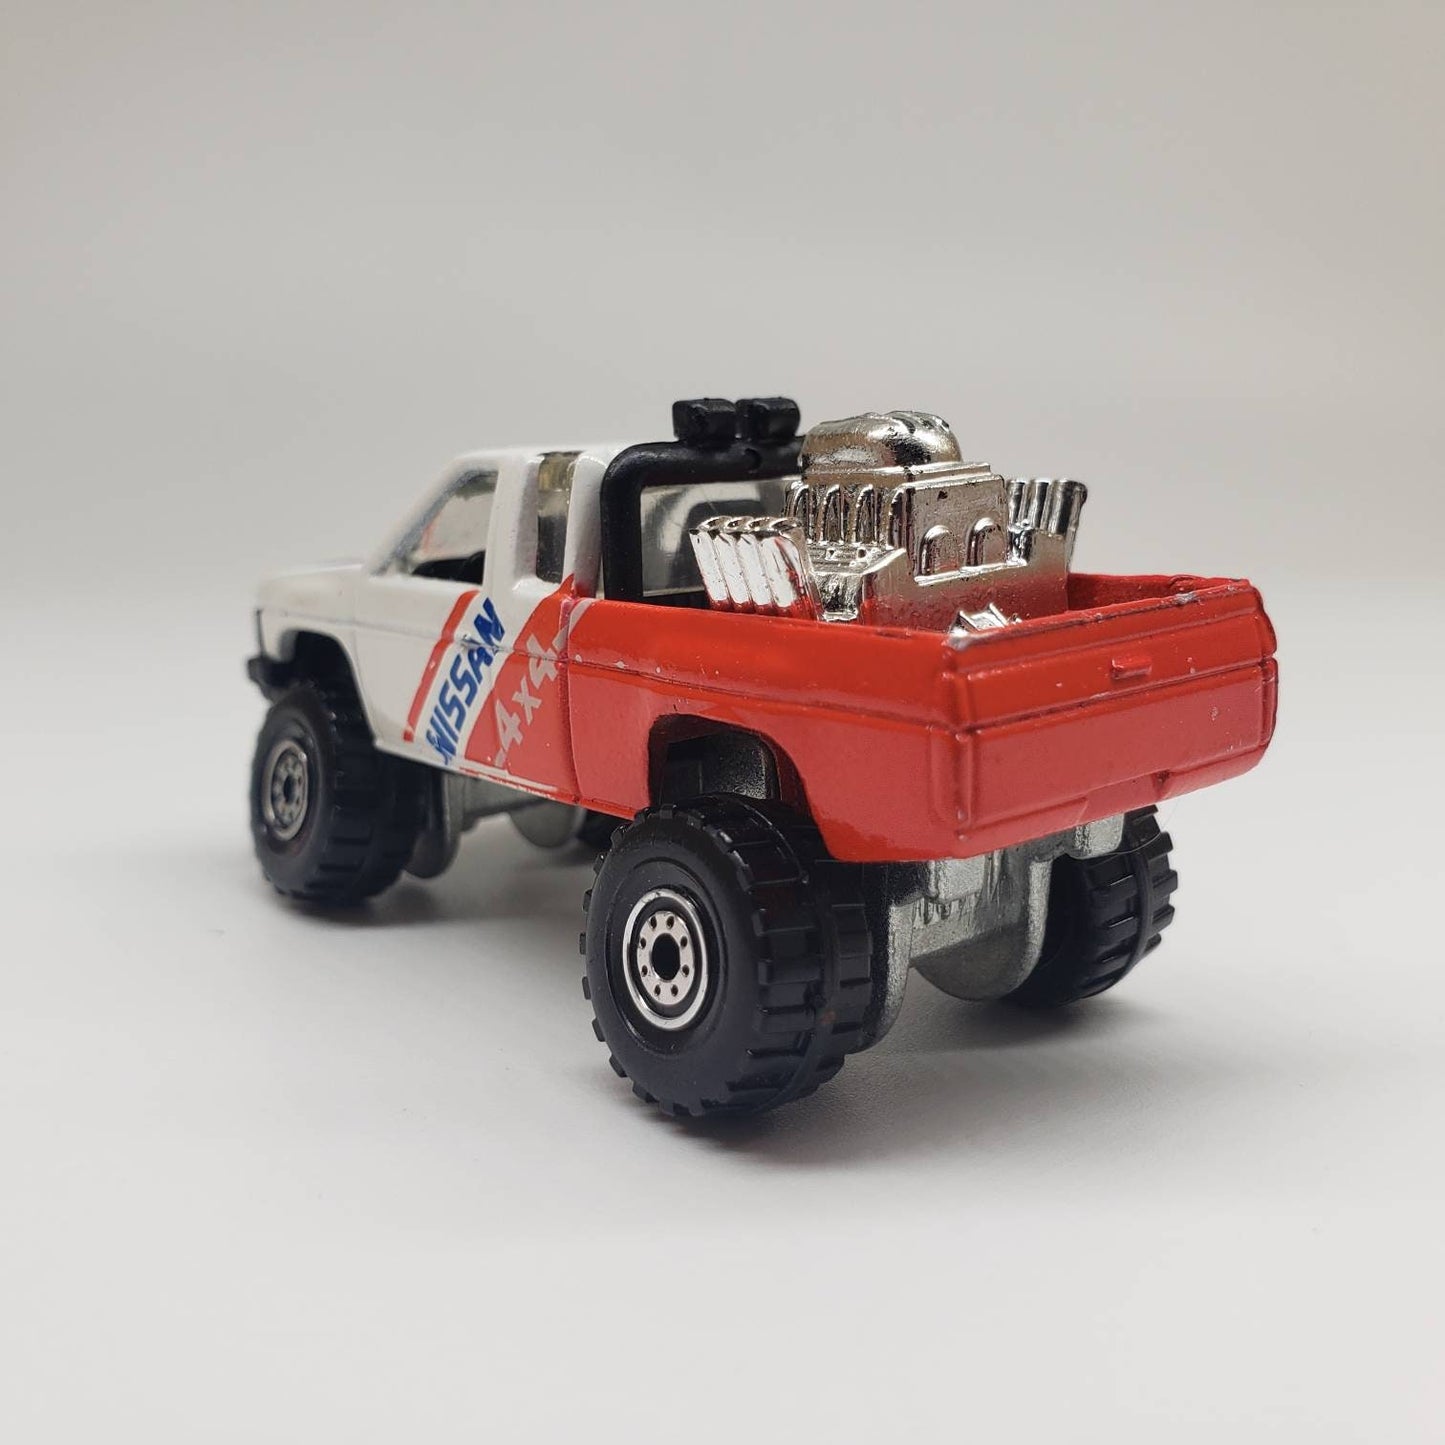 Hot Wheels Nissan Hardbody 4x4 White and Red Trailbusters Perfect Birthday Gift Miniature Collectable Scale Model Toy Car